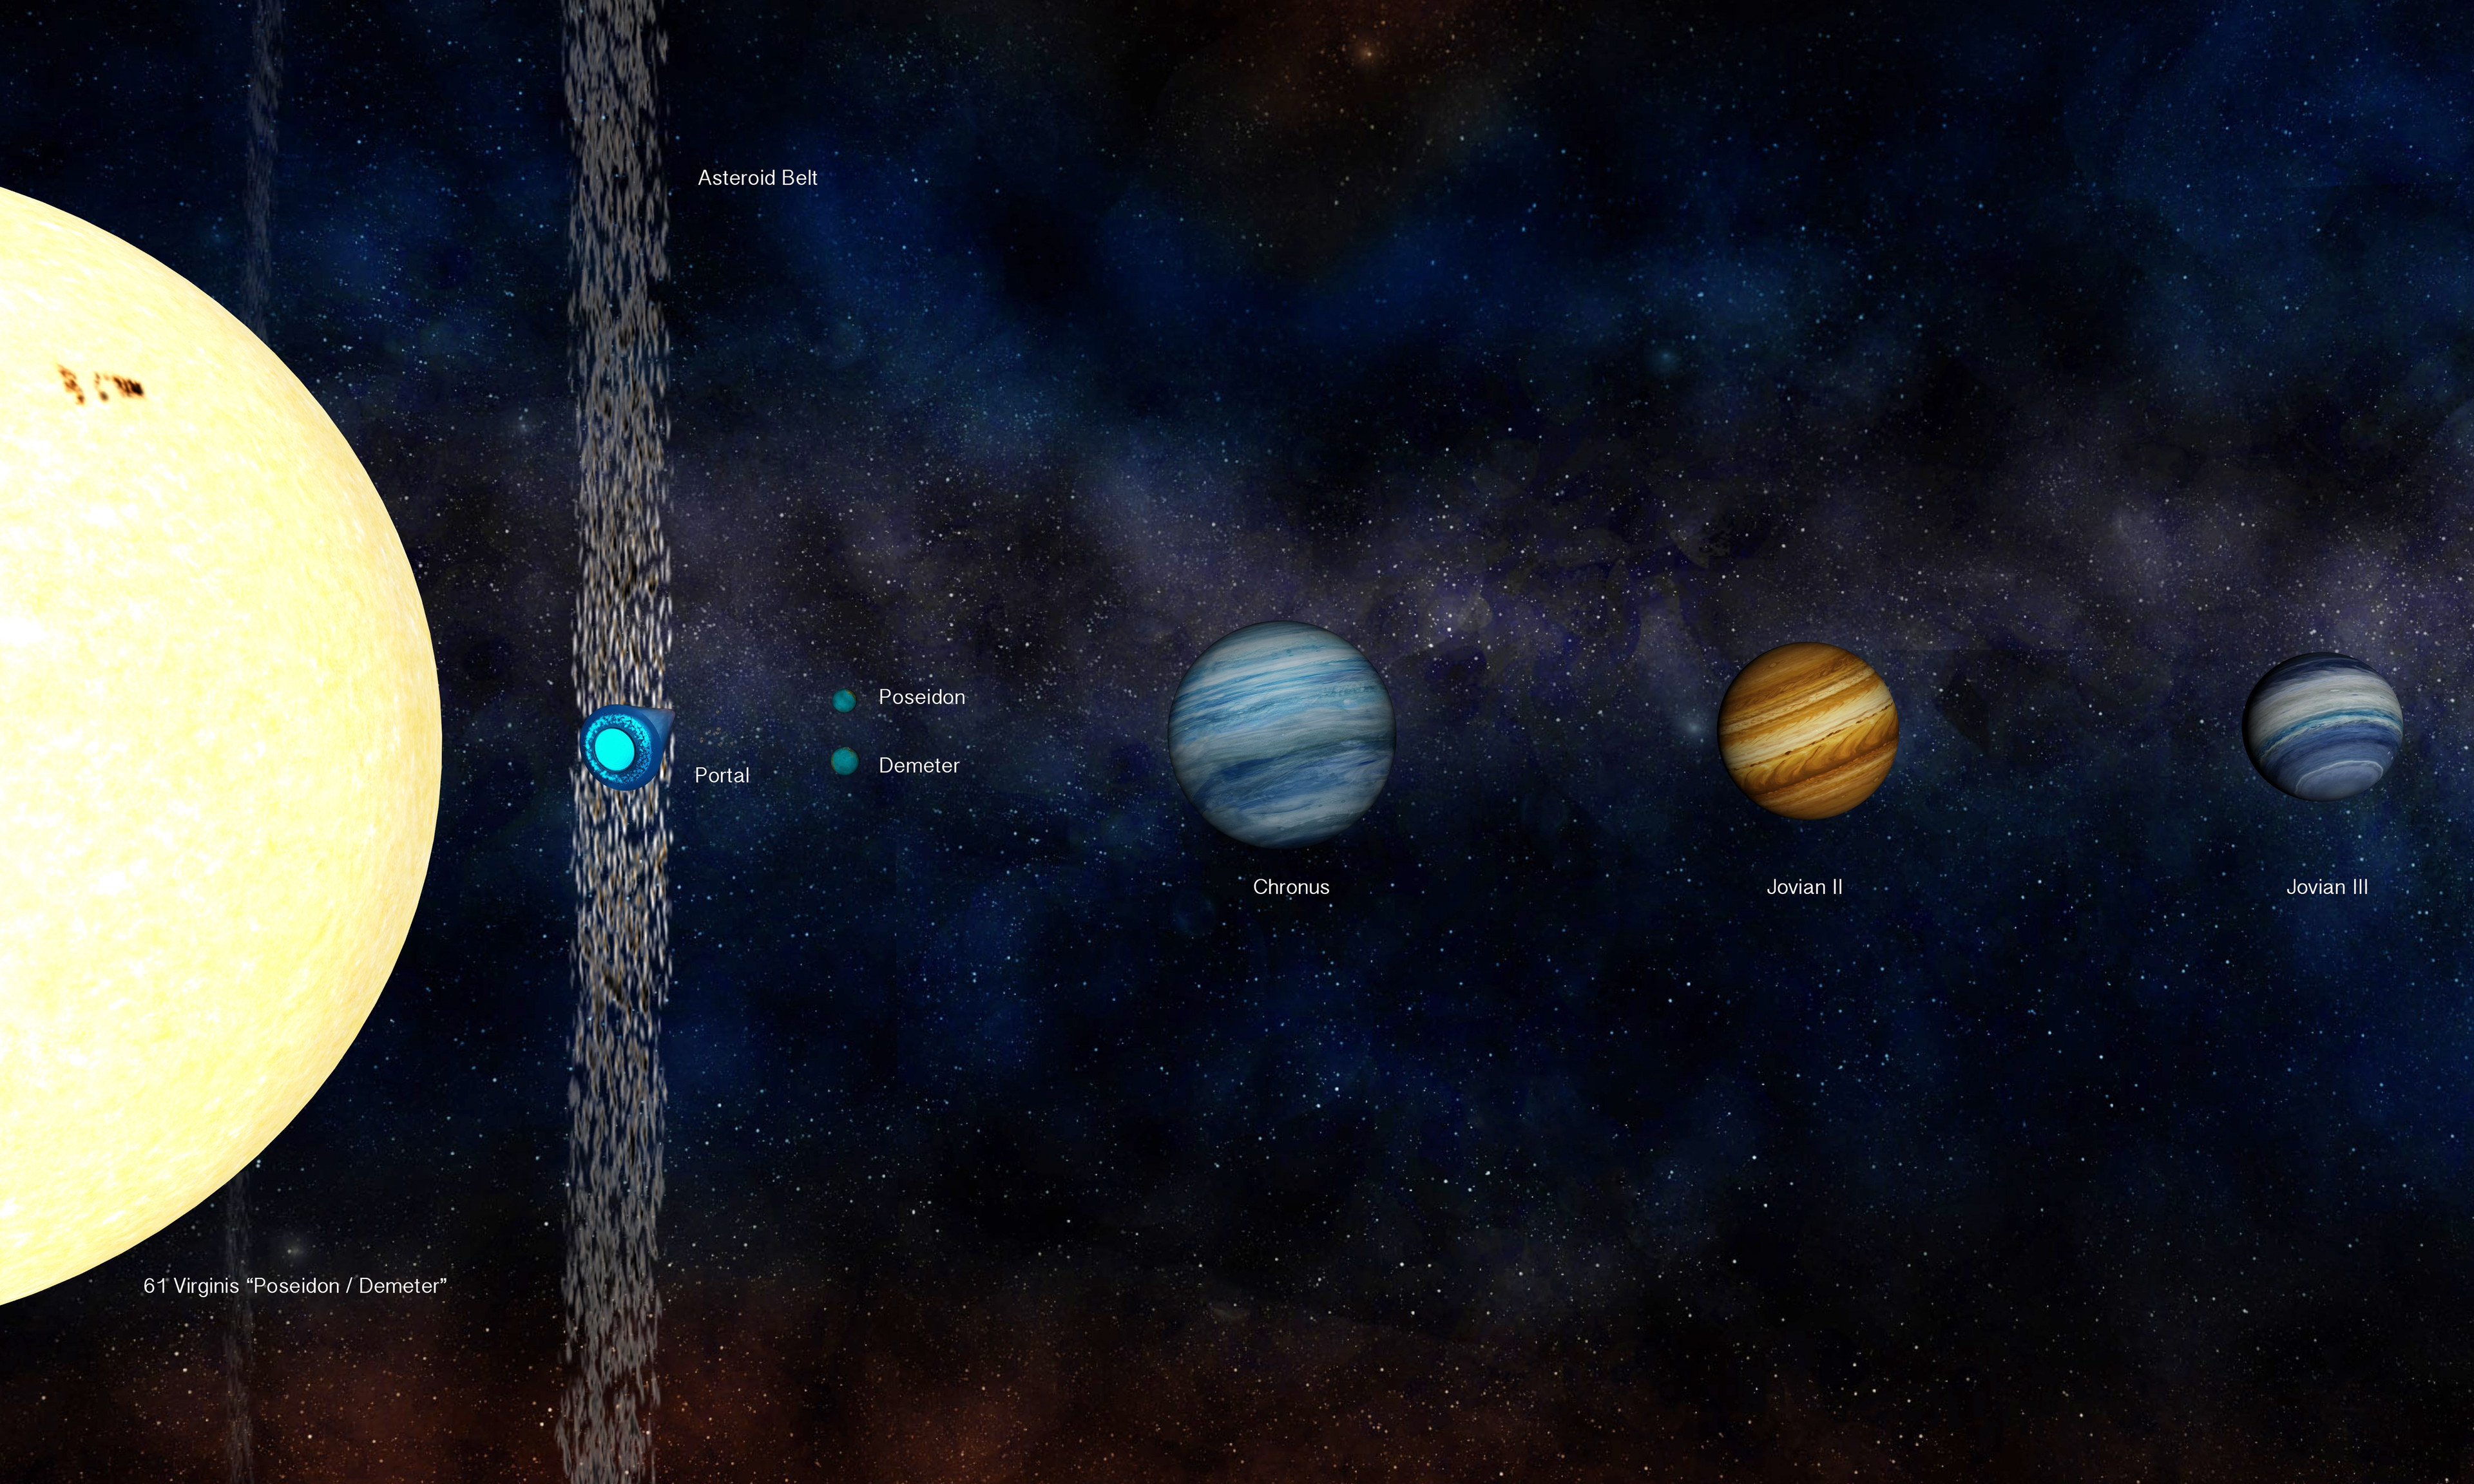 A Cosmography software space map for the Poseidon system.